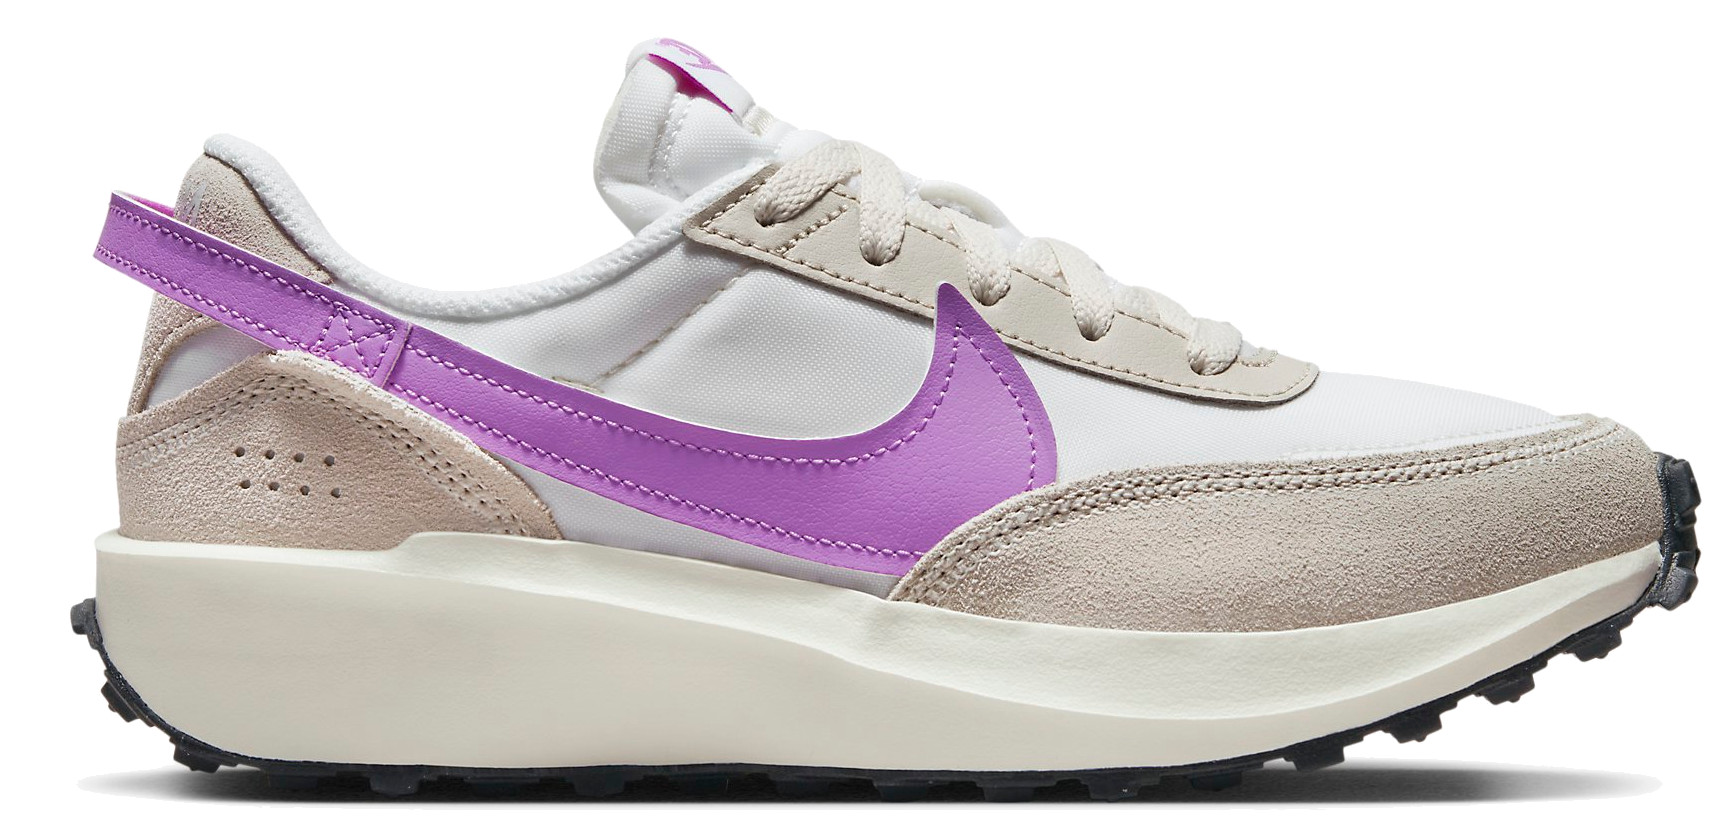 Chaussures Nike WMNS WAFFLE DEBUT